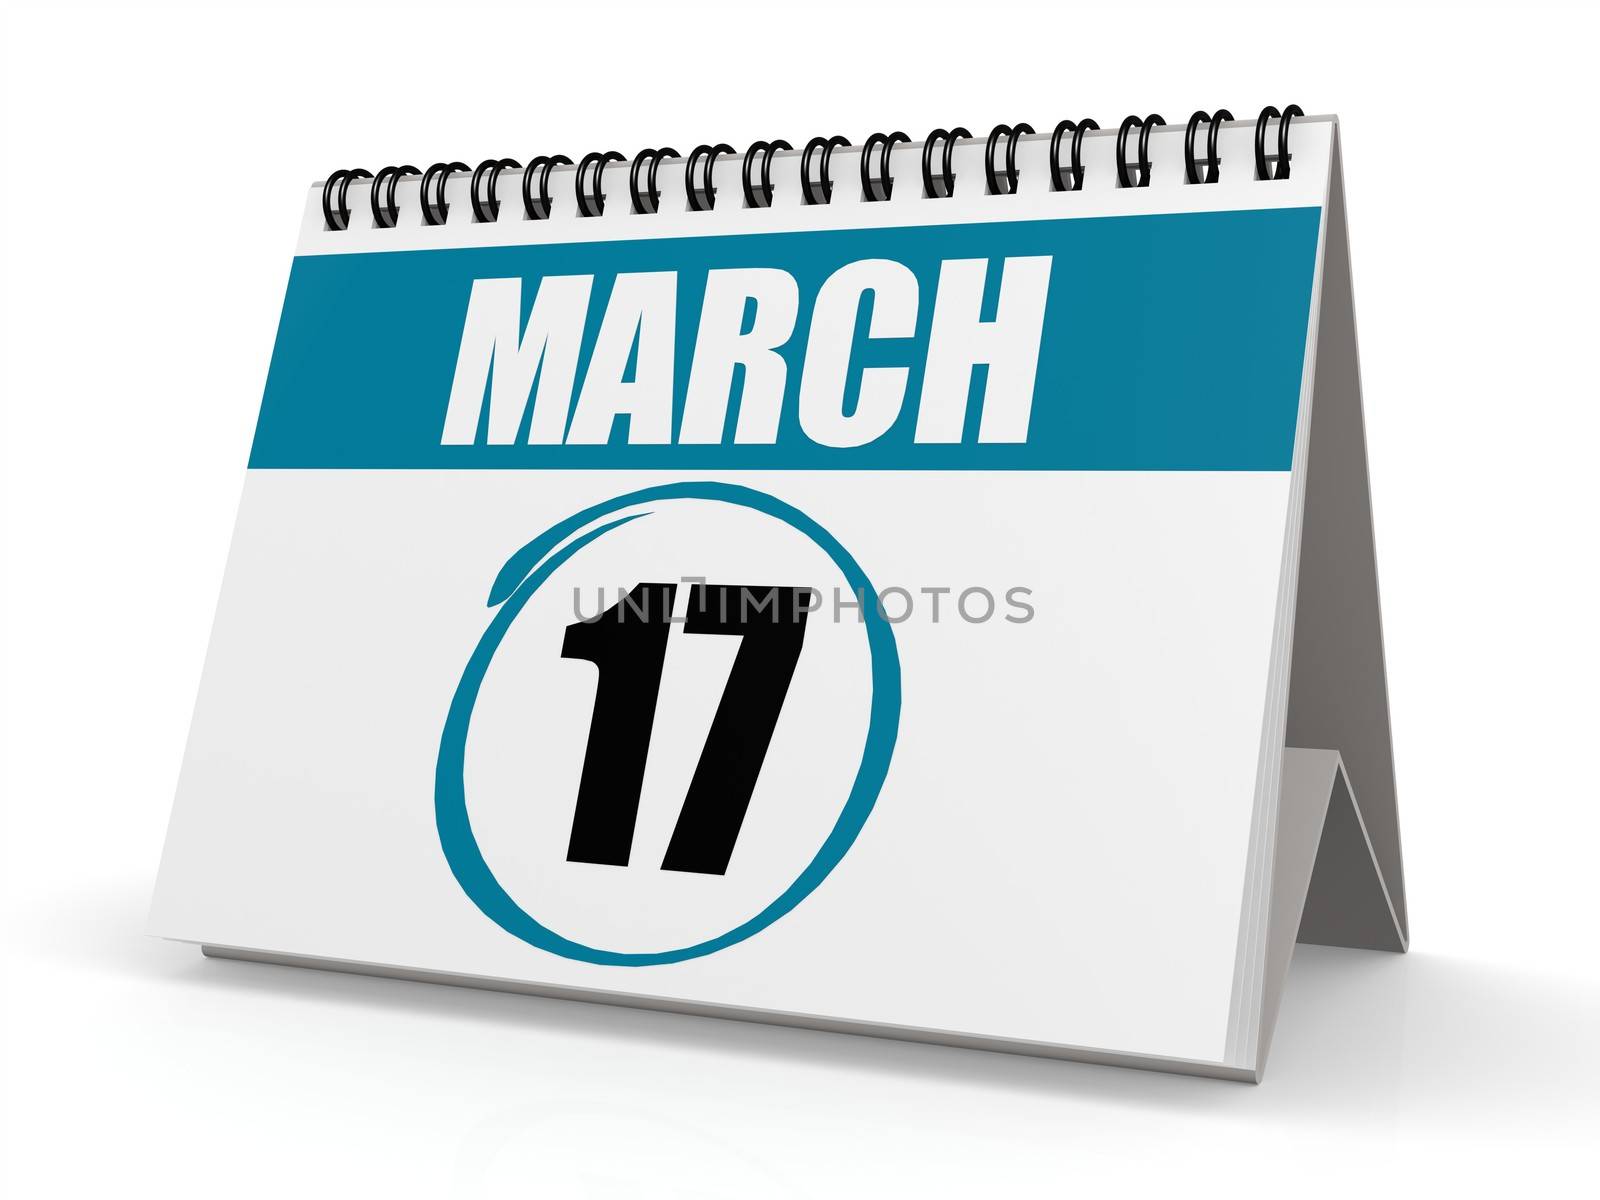 March 17 calendar image with hi-res rendered artwork that could be used for any graphic design.